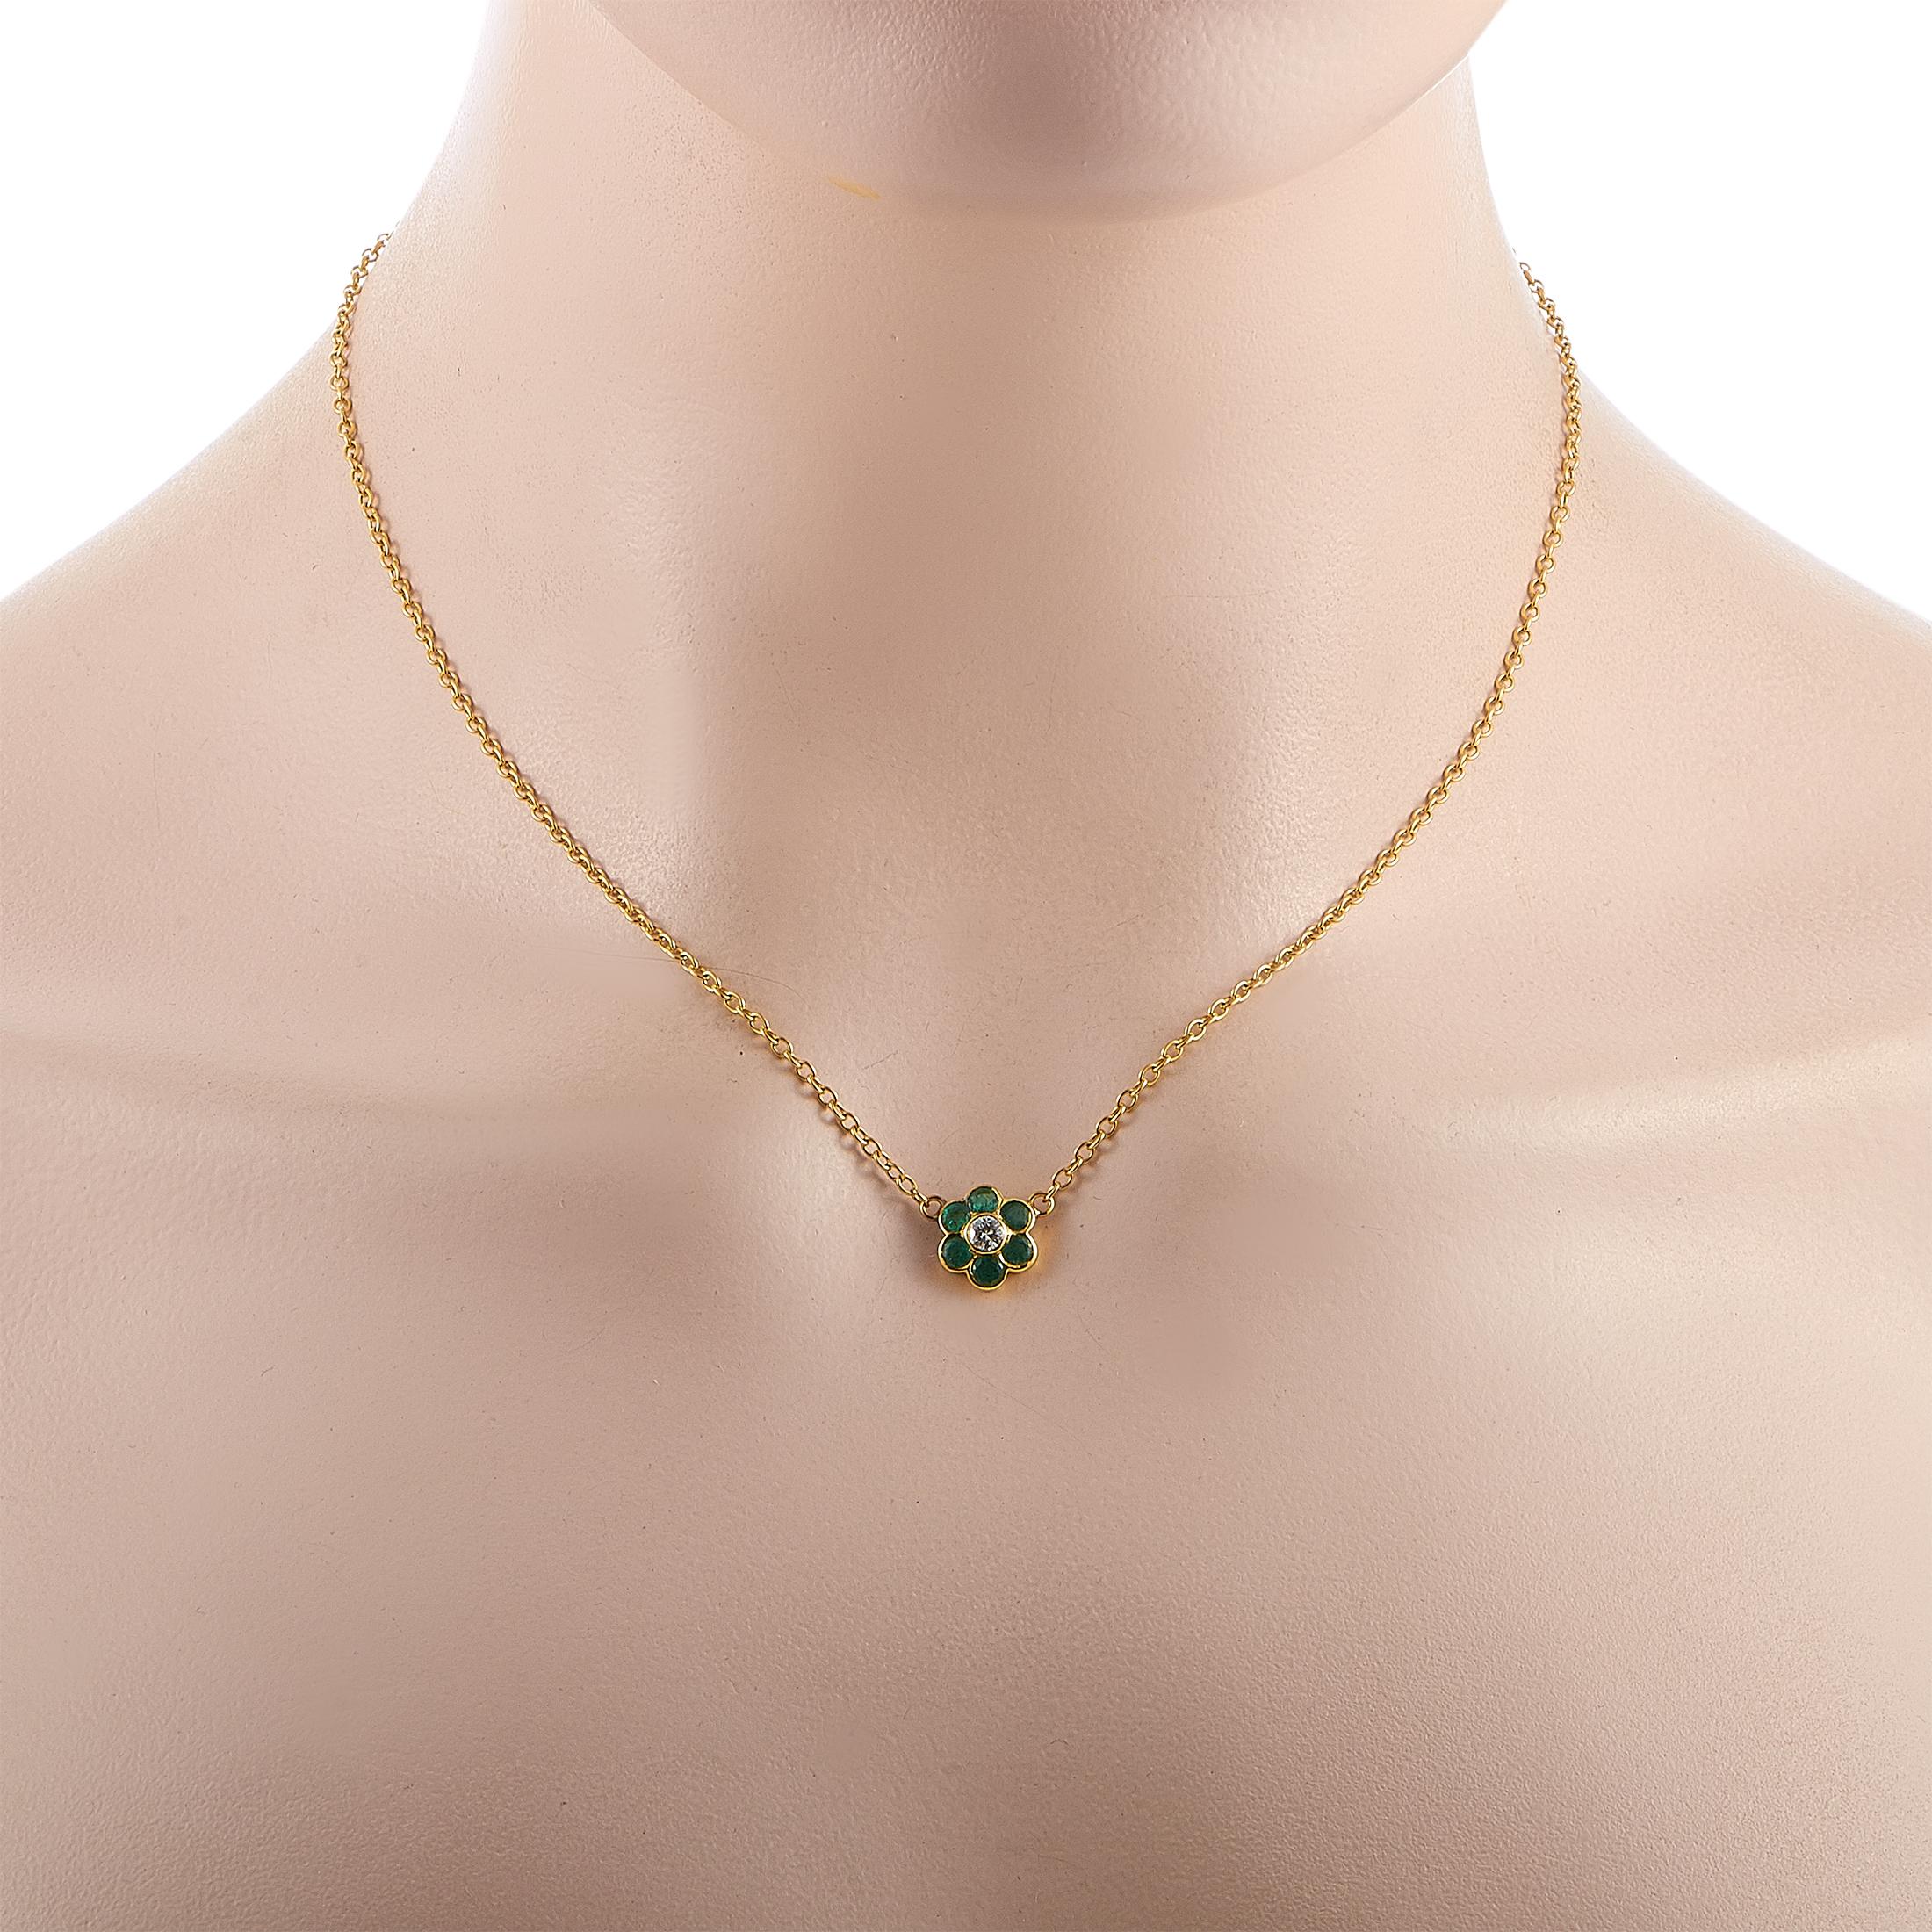 This Van Cleef & Arpels necklace is crafted from 18K yellow gold and embellished with emeralds and a diamond. The necklace weighs 5 grams and is presented with a 17” chain, onto which a 0.37” by 0.37” pendant is attached.

Offered in estate